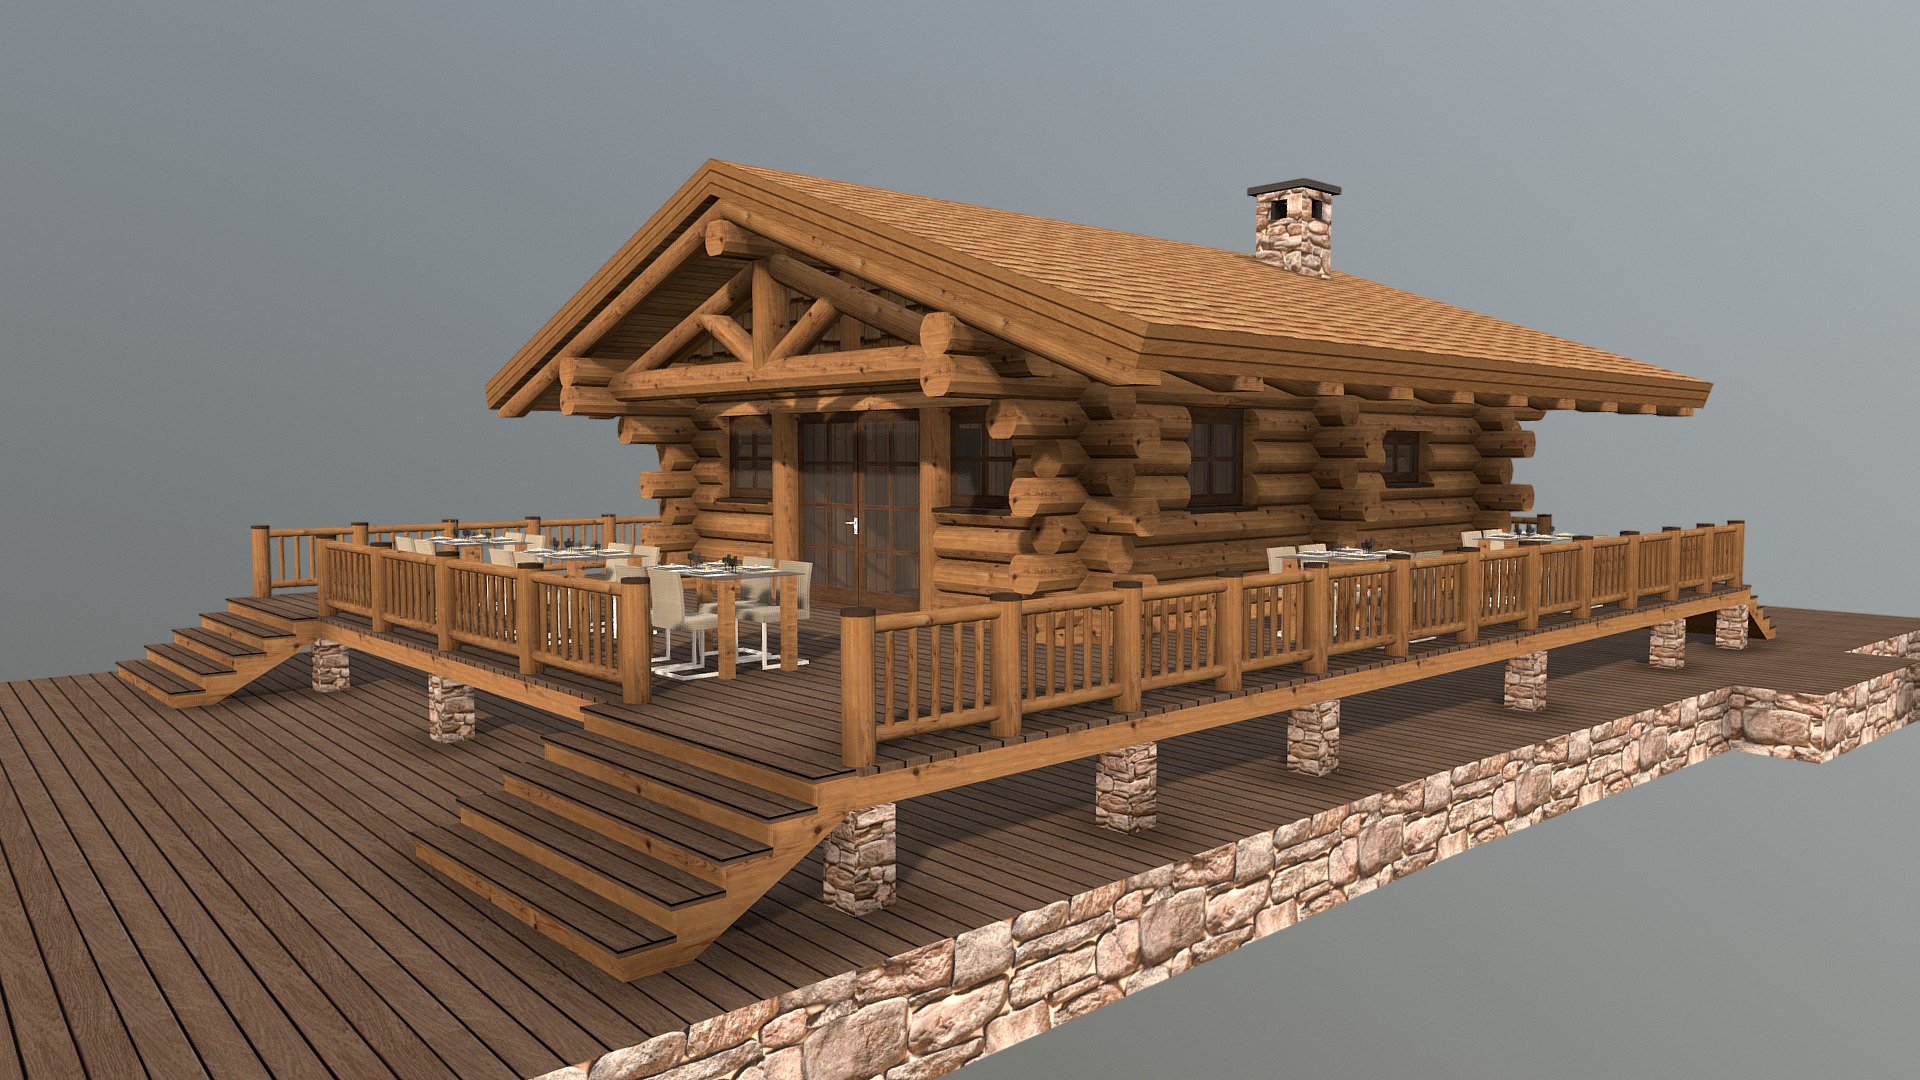 3D model Баня 2.0 (Берег) - This is a 3D model of the Баня 2.0 (Берег). The 3D model is about a house with a deck.